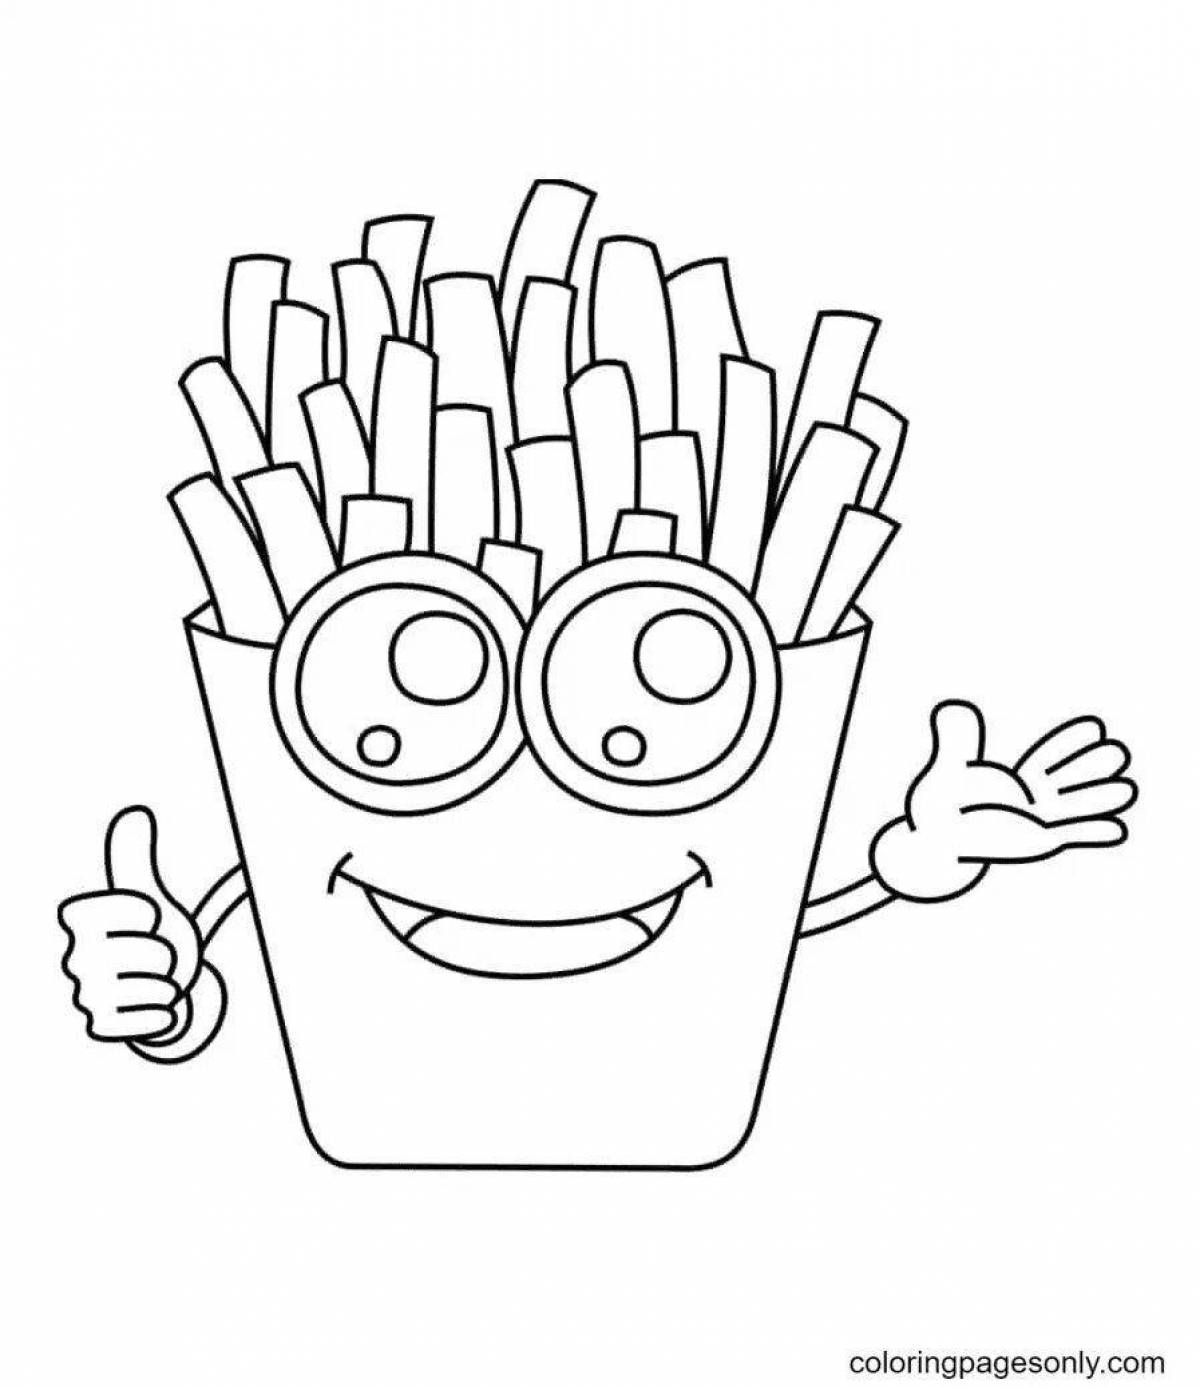 Stimulating french fries coloring book for kids